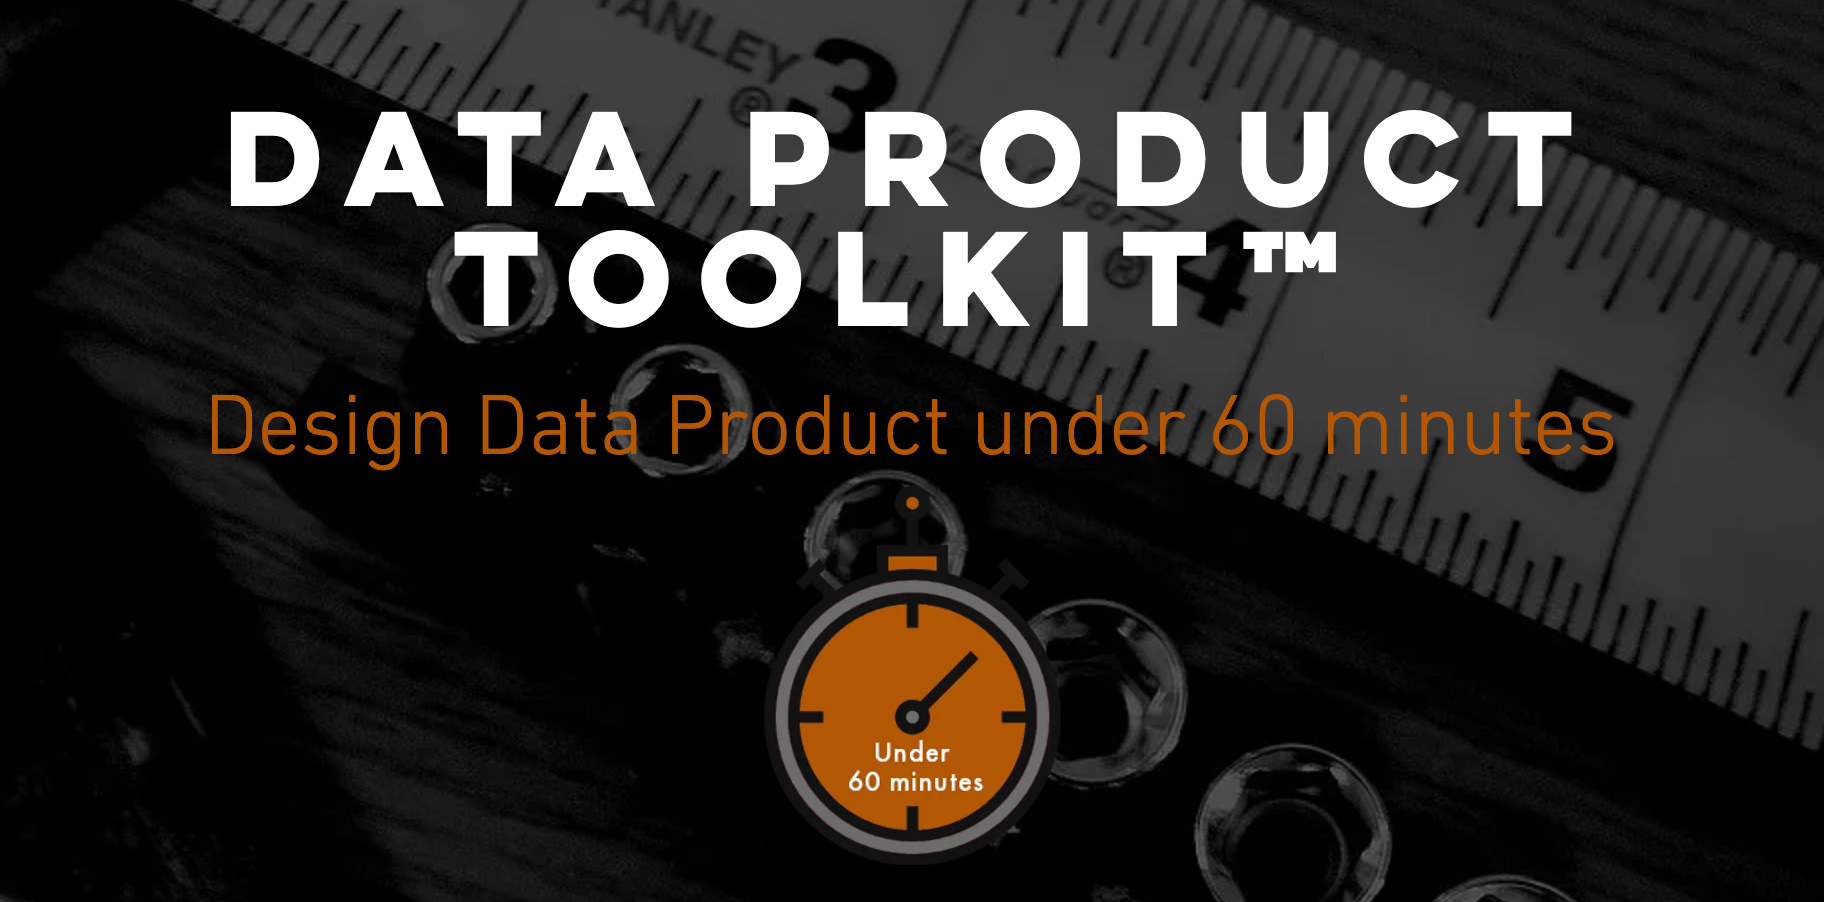 Data Product Toolkit